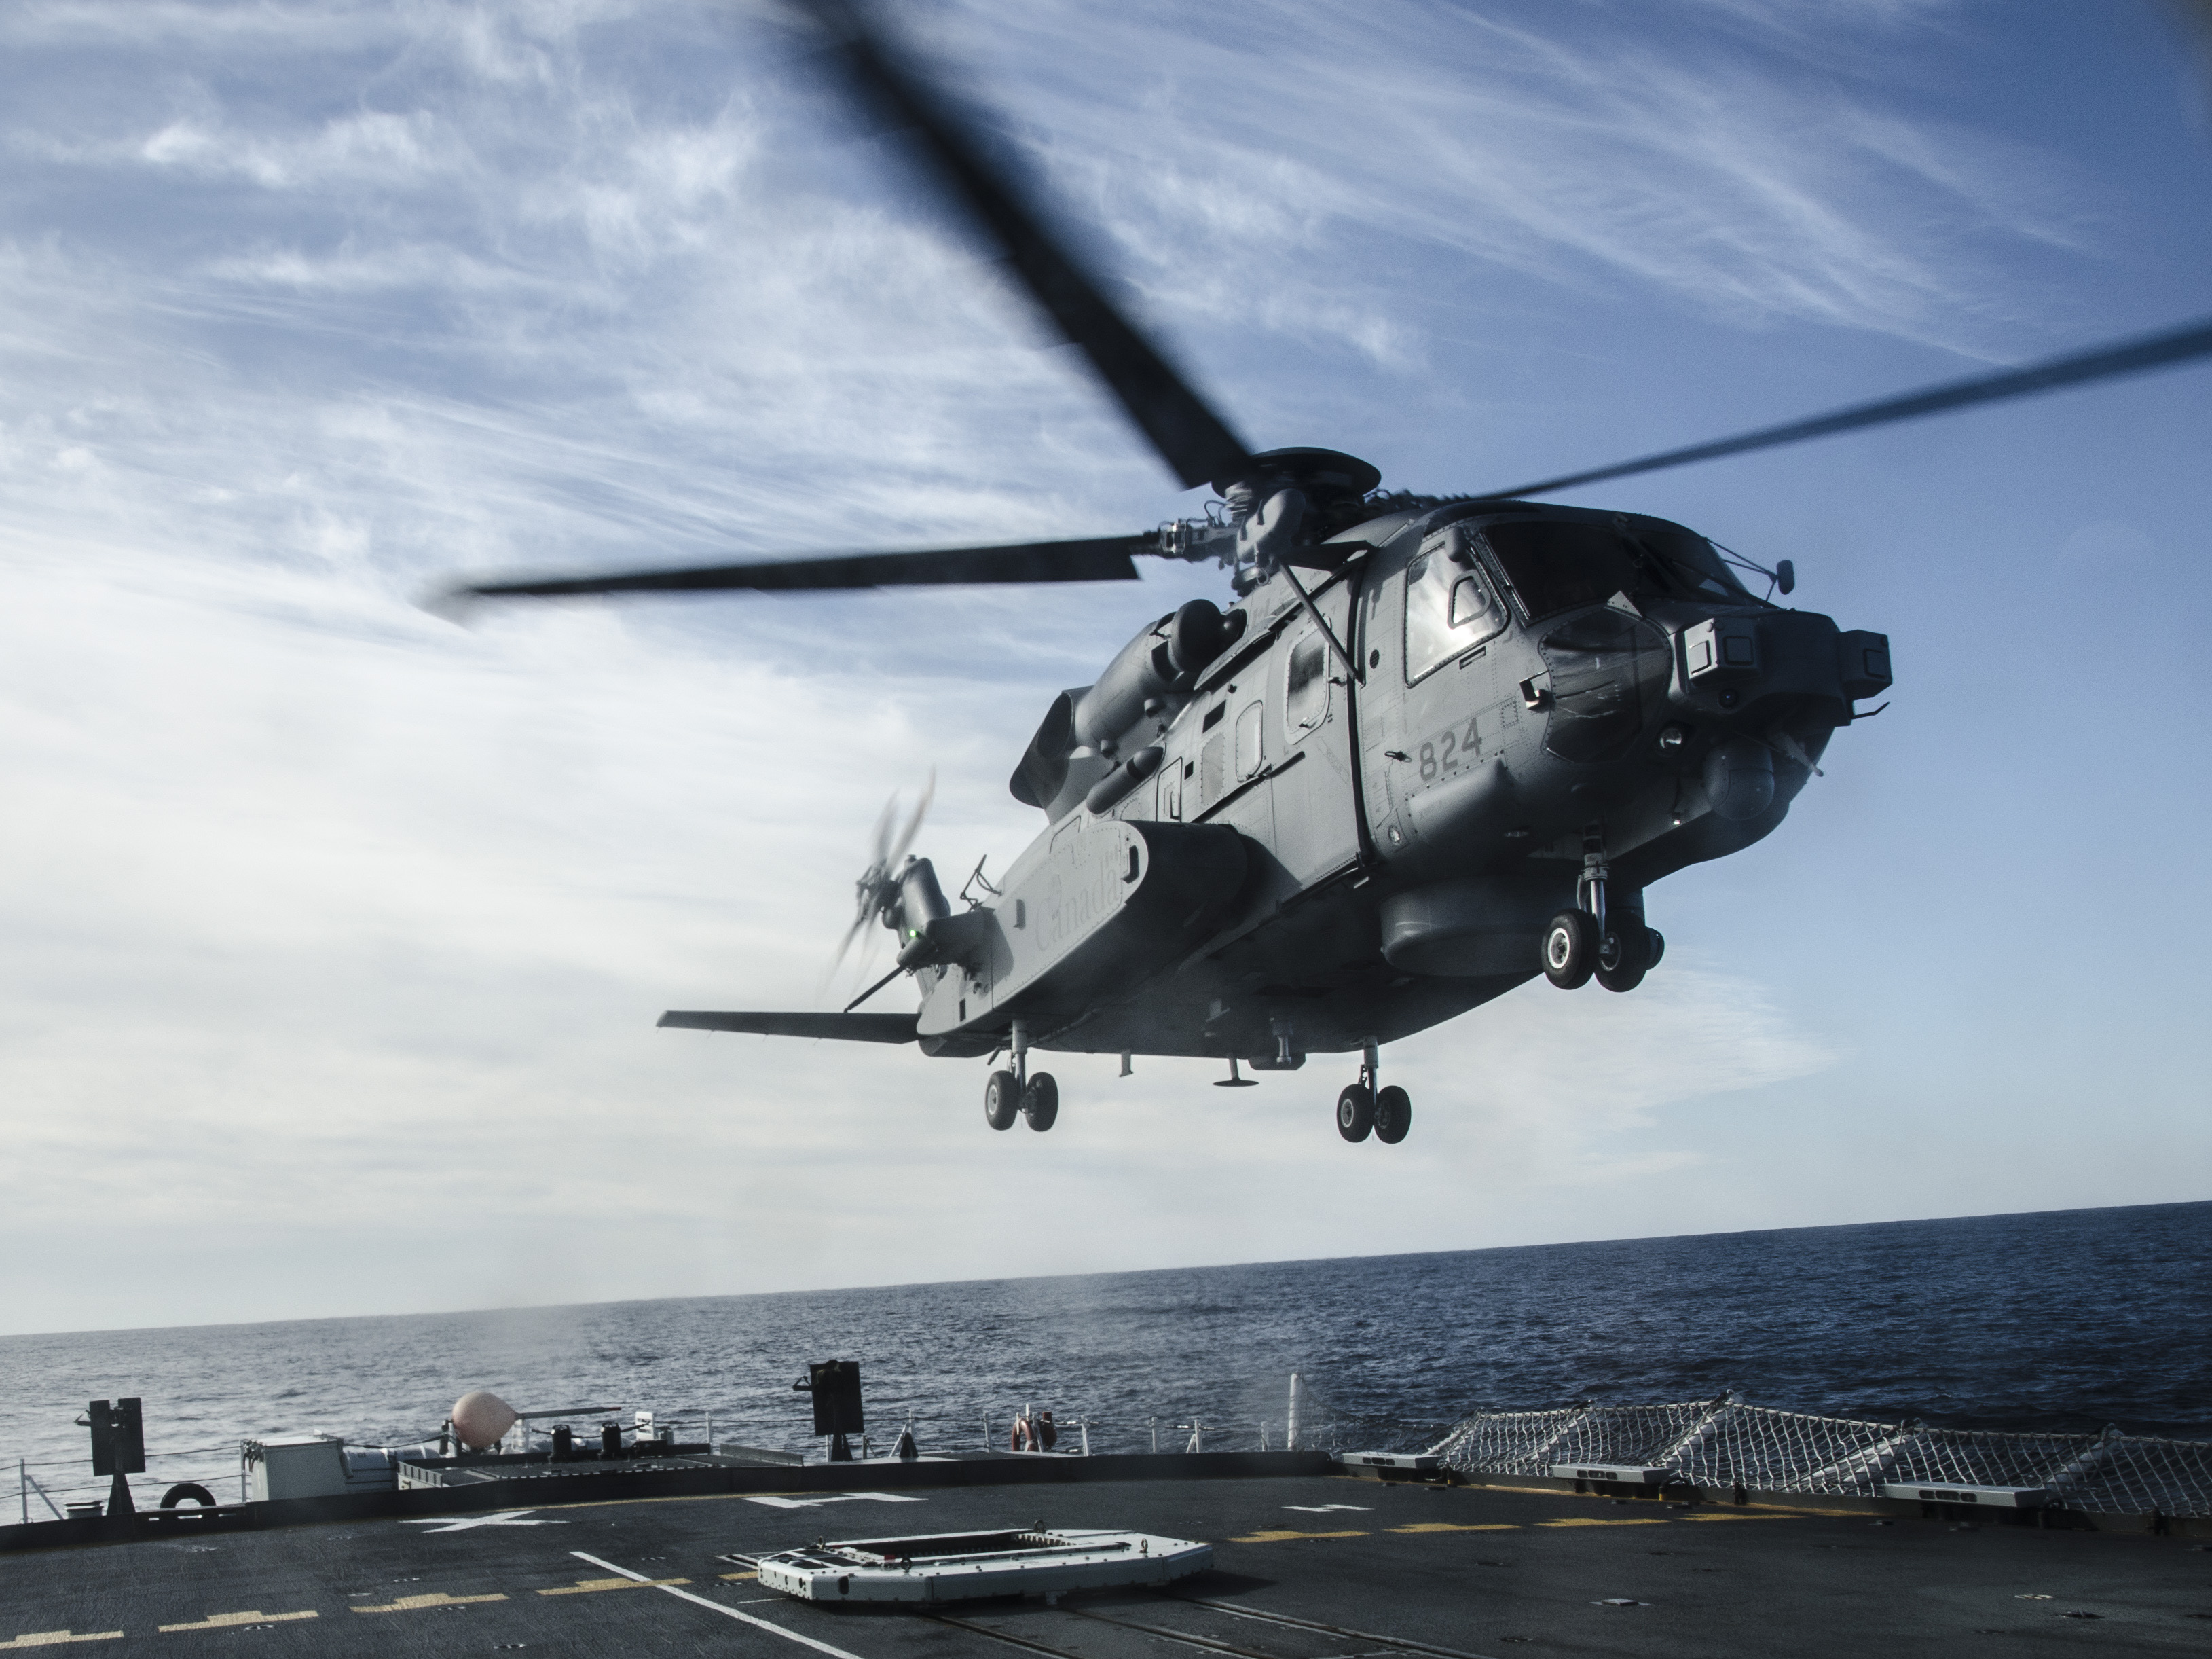 HS28-2016-0001-011 One of Canada's newly acquired CH-148 Cyclone helicopters practices landing procedures on HMCS Halifax off the coast of Nova Scotia on 27 January 2016. Photo: Ordinary Seaman Raymond Kwan, Formation Imaging Services, Halifax. HS28-2016-0001-011 Le nouvel hlicoptre CH-148 Cyclone, acquis rcemment par le Canada, pratique des manÏuvres dÕatterrissages sur le Navire canadien de Sa Majest (NCSM) Halifax prs des ctes de la Nouvelle cosse le 27 janvier 2016. Photo : Matelot de 3e classe Raymond Kwan, Services dÕimagerie de la formation, Halifax.